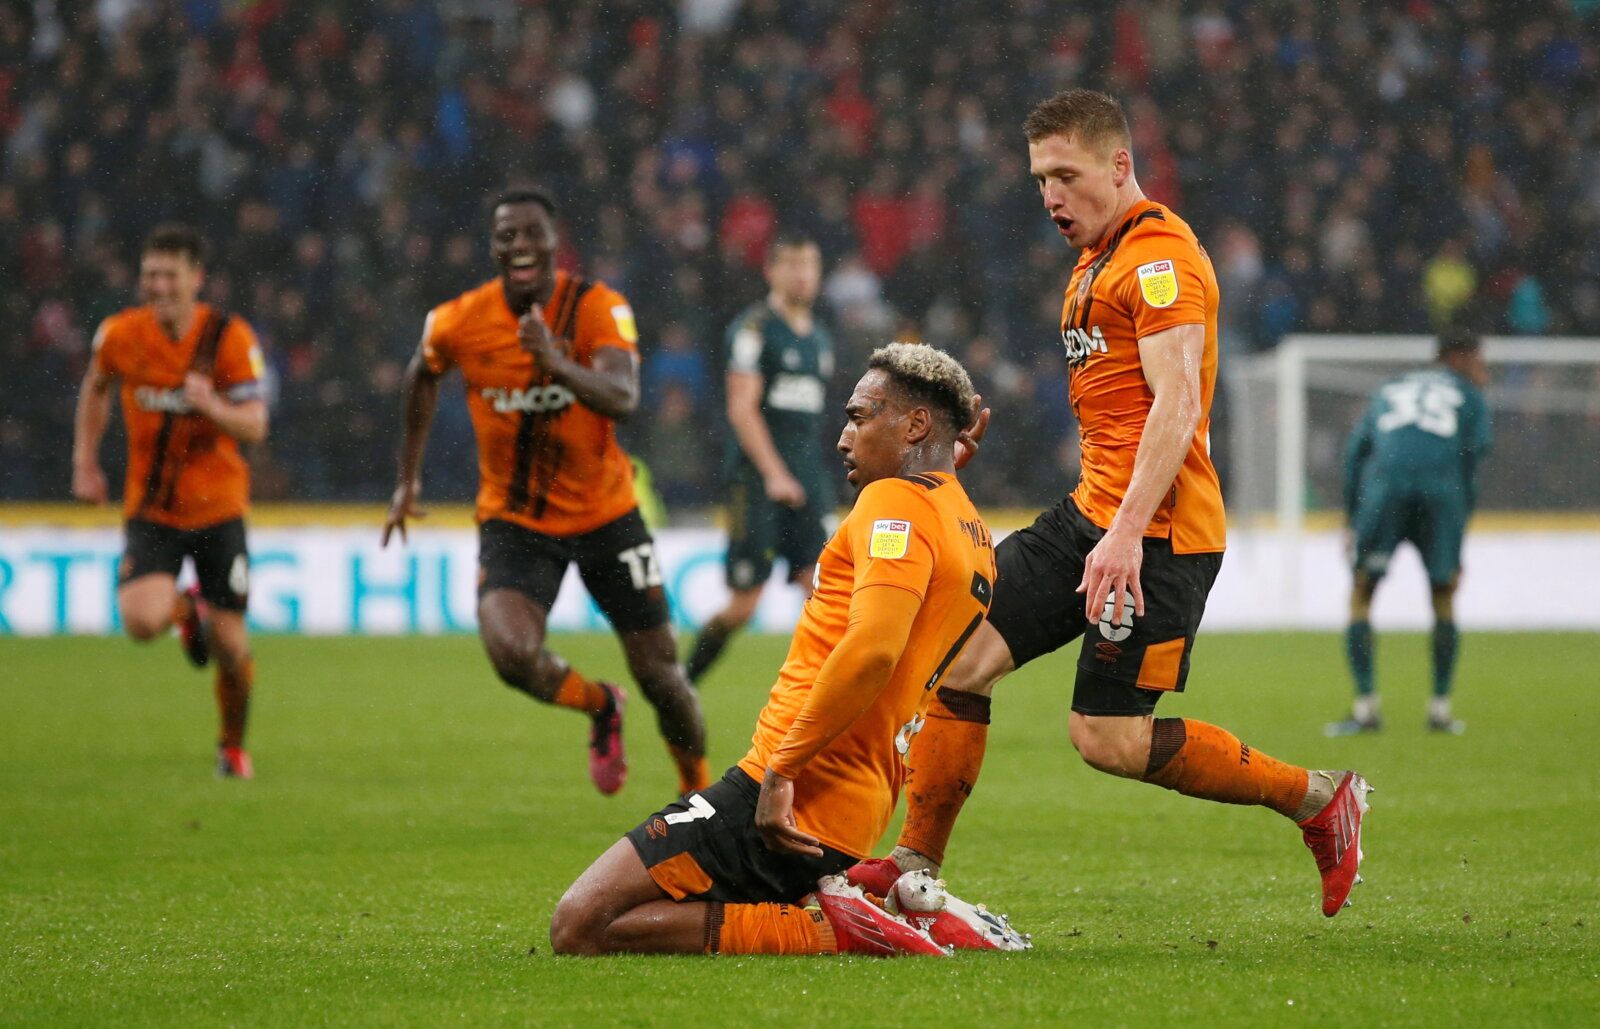 Soccer Football - Championship - Hull City v Middlesbrough - KCOM Stadium, Hull, Britain - October 2, 2021  Hull City's Mallik Wilks celebrates scoring their second goal  Action Images/Ed Sykes  EDITORIAL USE ONLY. No use with unauthorized audio, video, data, fixture lists, club/league logos or 